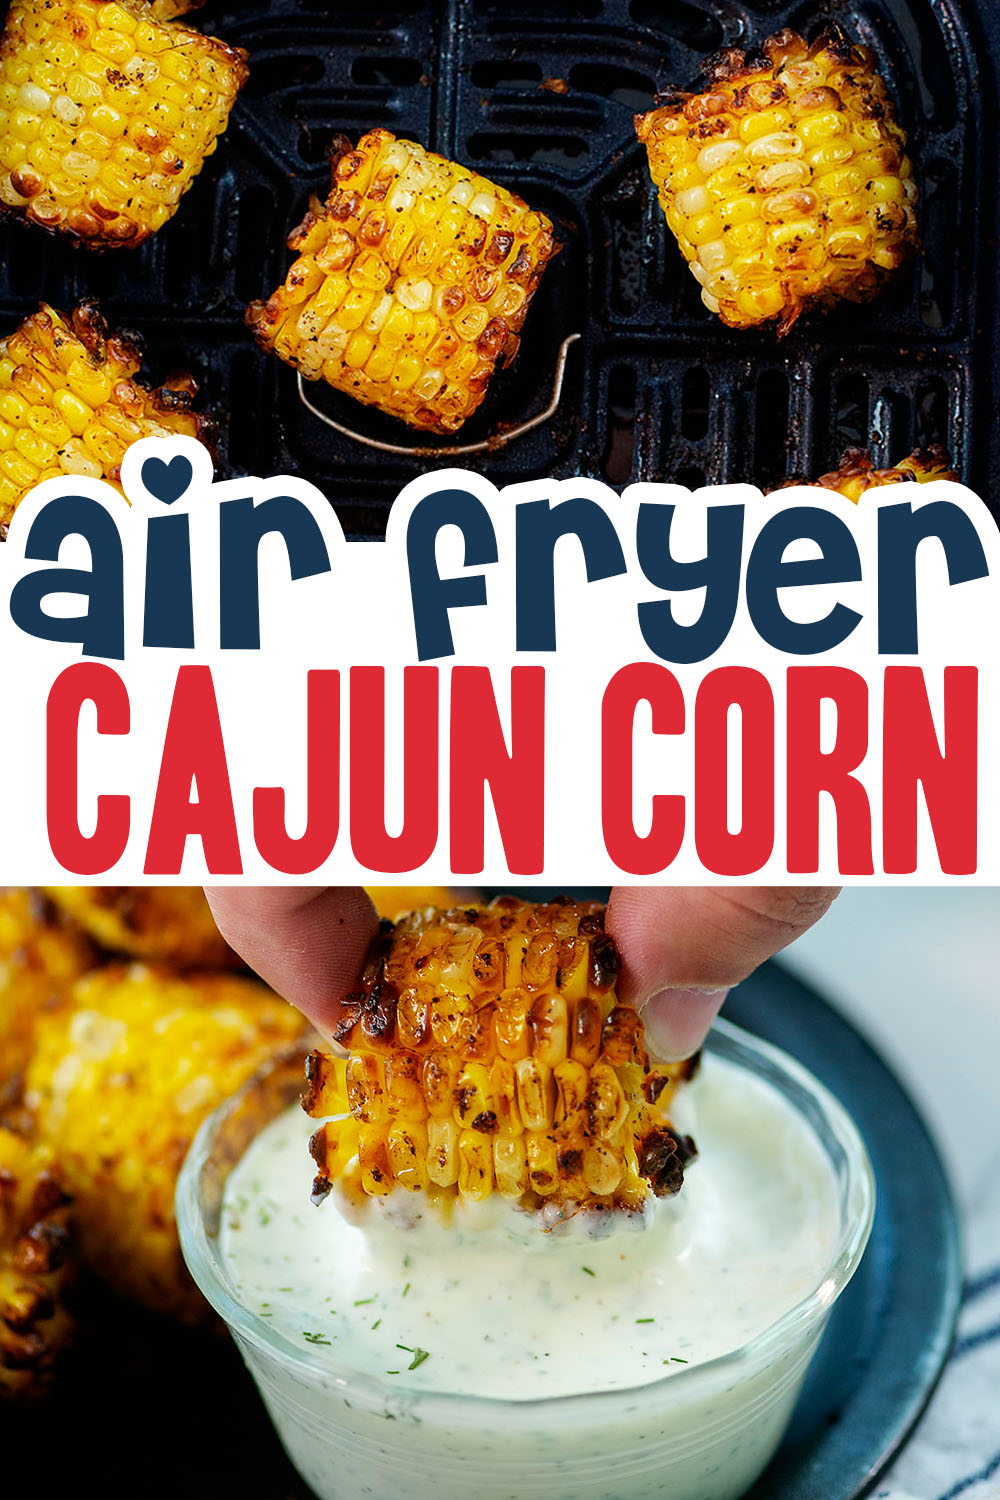 This Cajun Fried Corn is just like the Wingstop recipe but it's cooked in the air fryer at home! Dip in ranch for the best flavor!